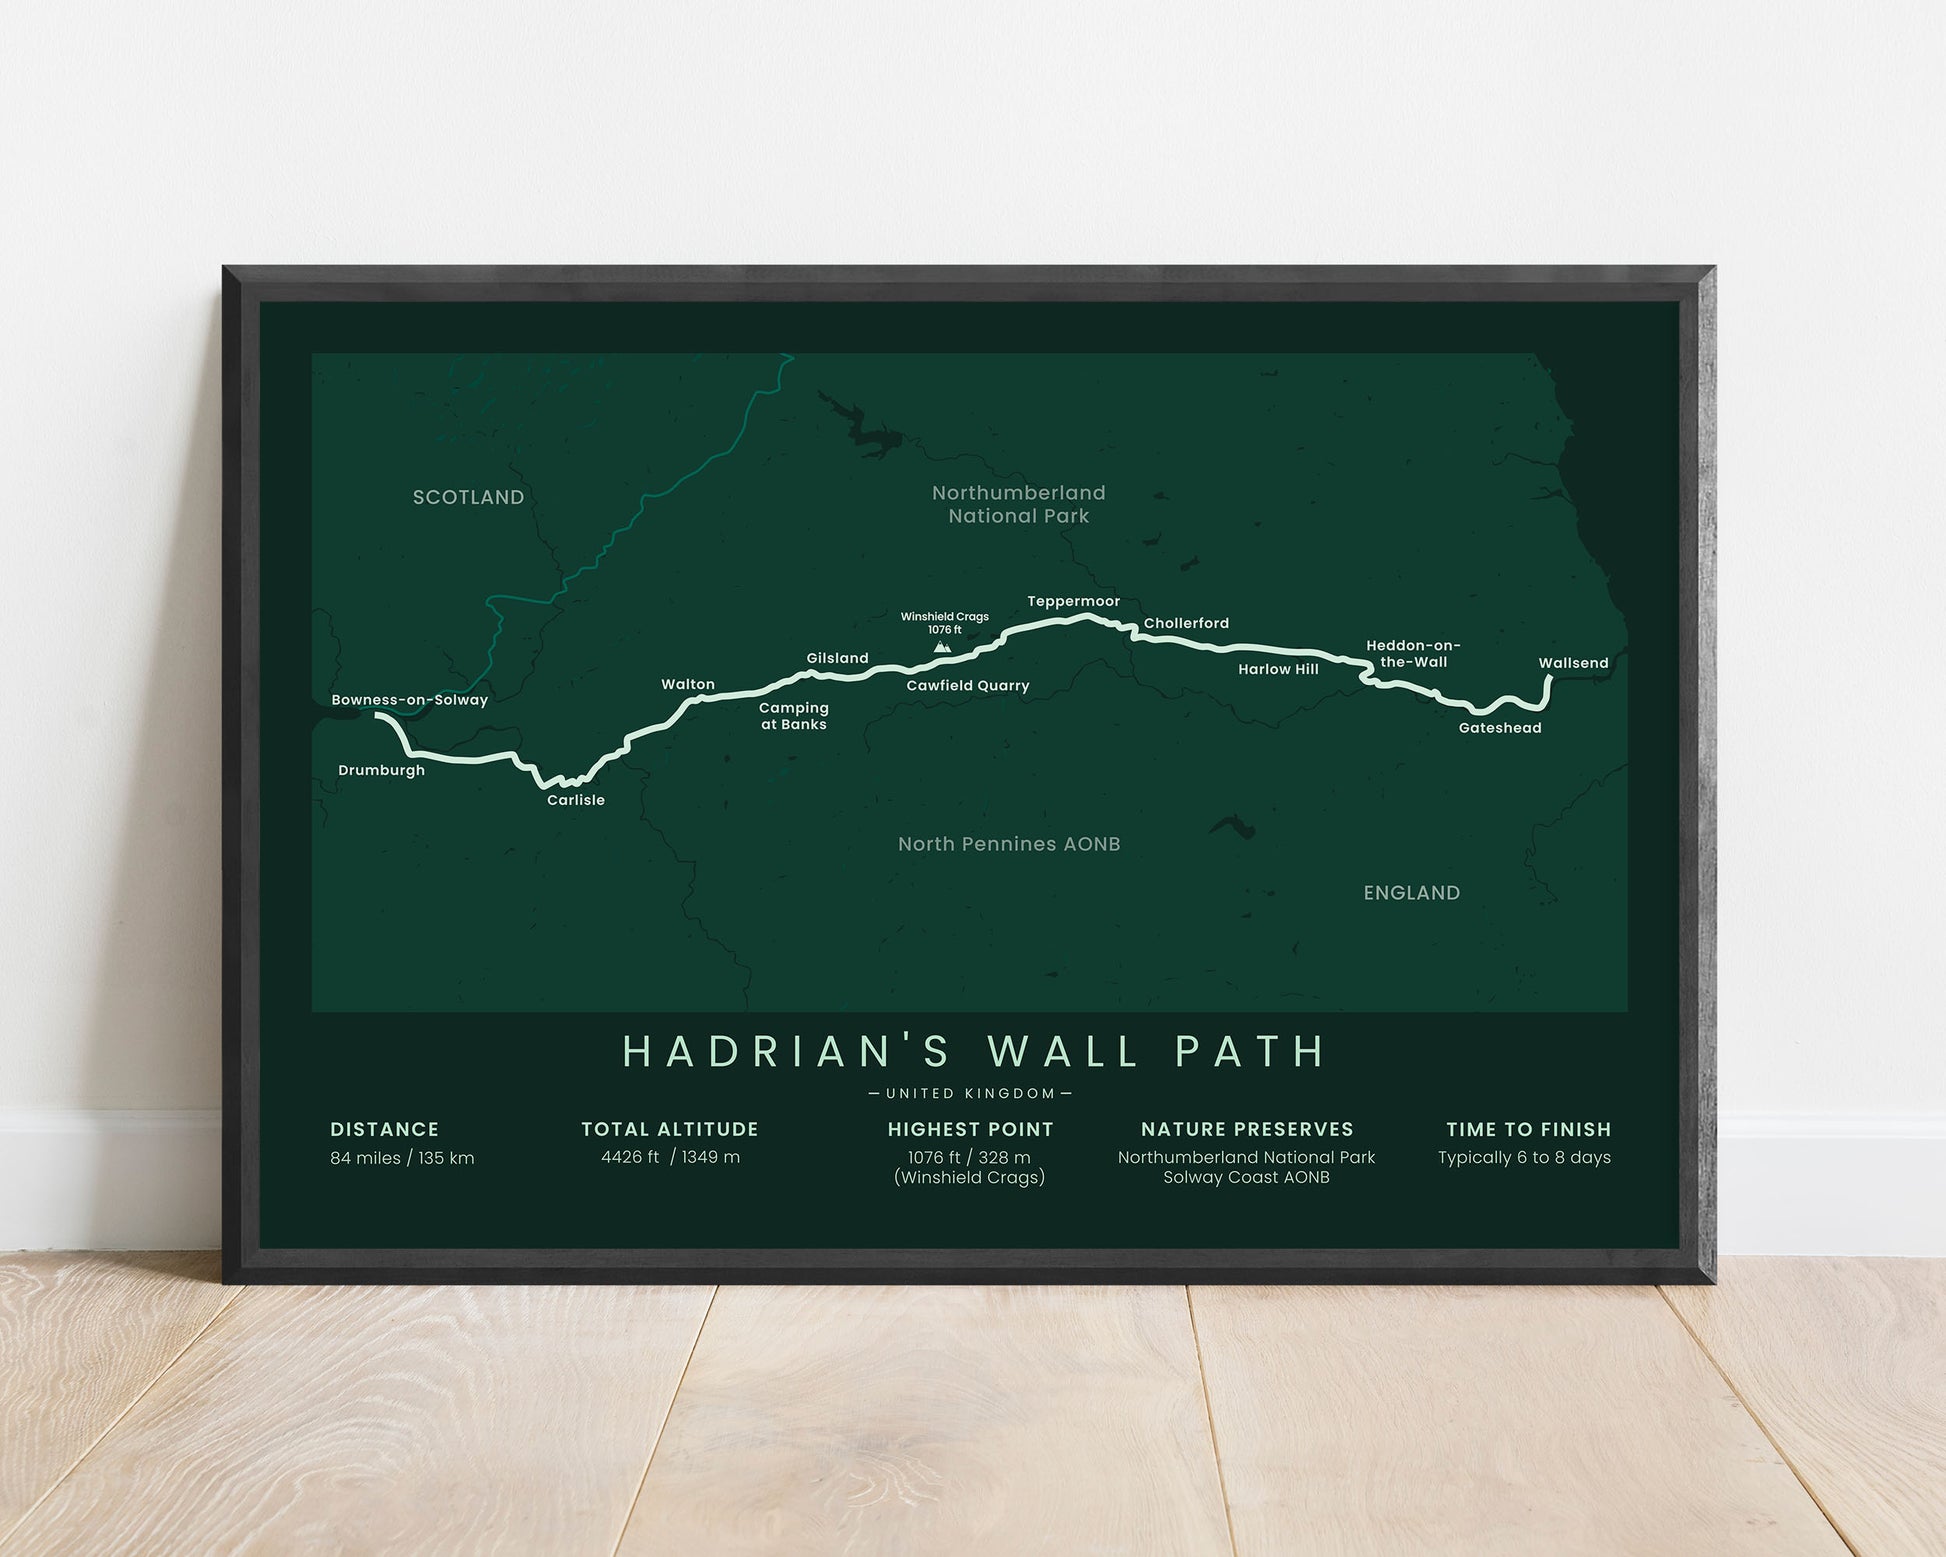 Hadrian's Wall Path National Trail (Northumberland National Park) track wall art with green background